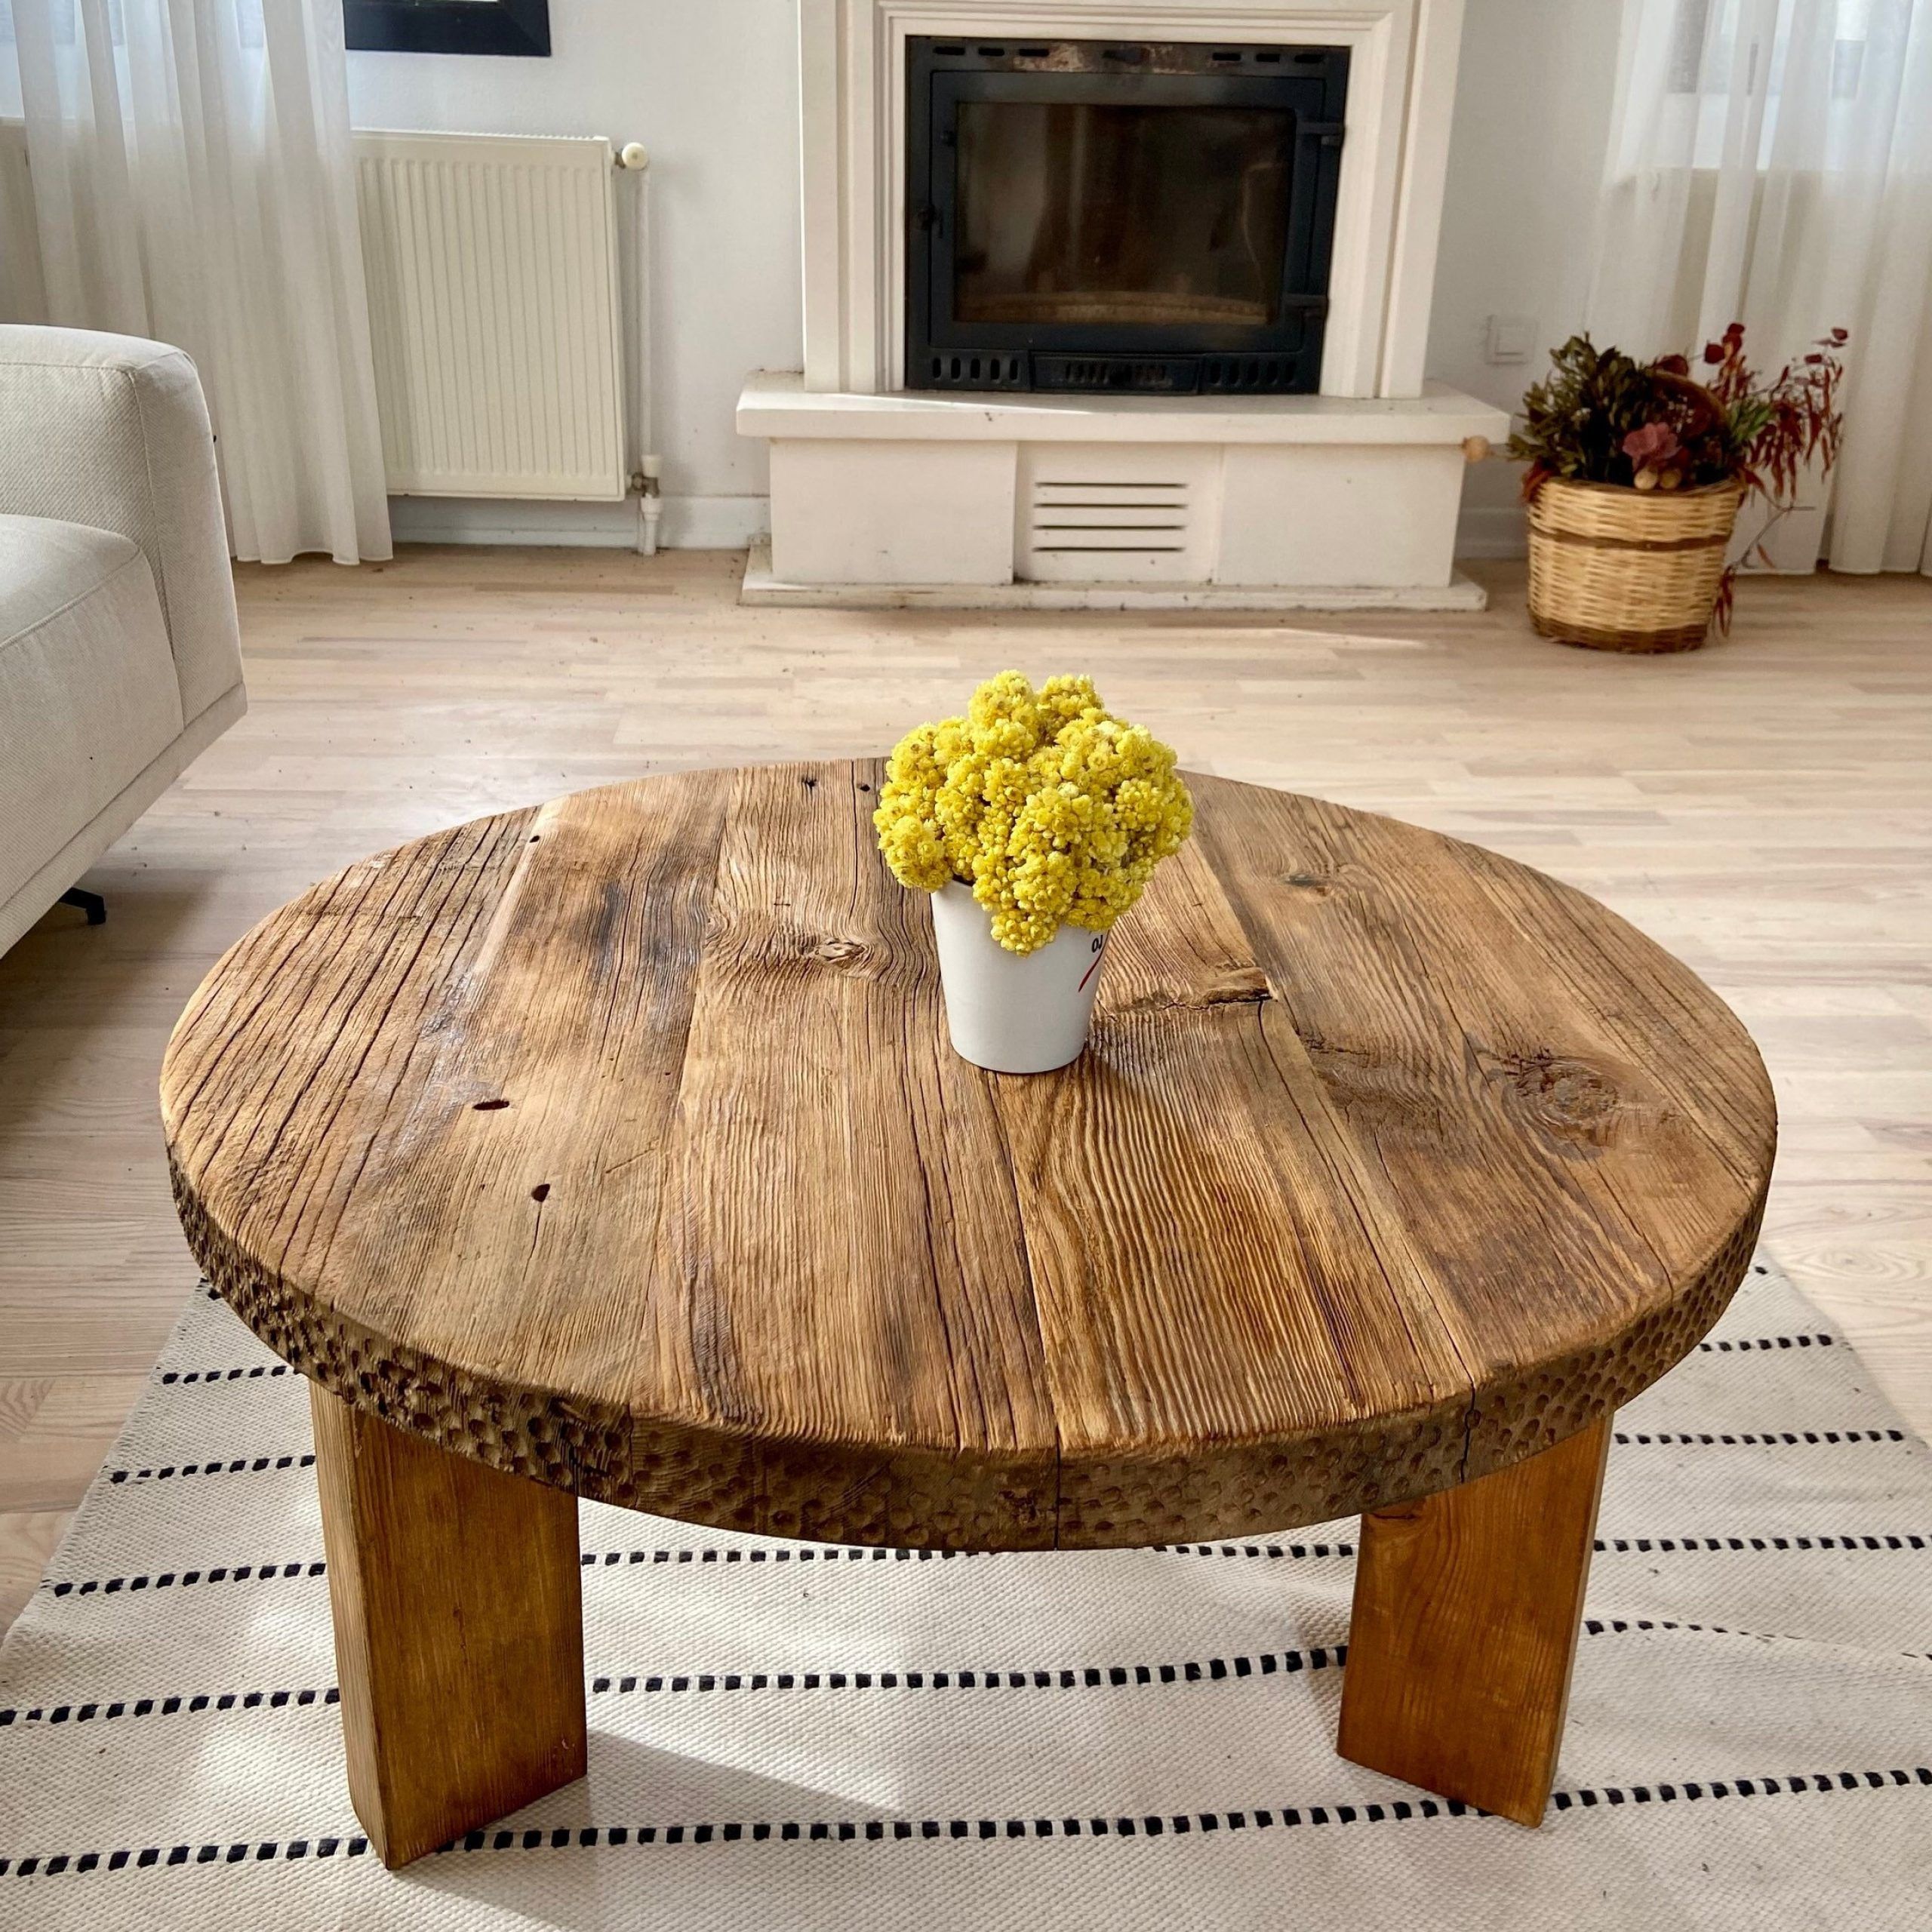 Natural Wood Coffee Table Reclaimed, Round Wooden Coffee Table Rustic Home  Decor, Rustic Round Coffee Table Furniture Handmade – Etsy With 2020 Rustic Wood Coffee Tables (View 5 of 10)